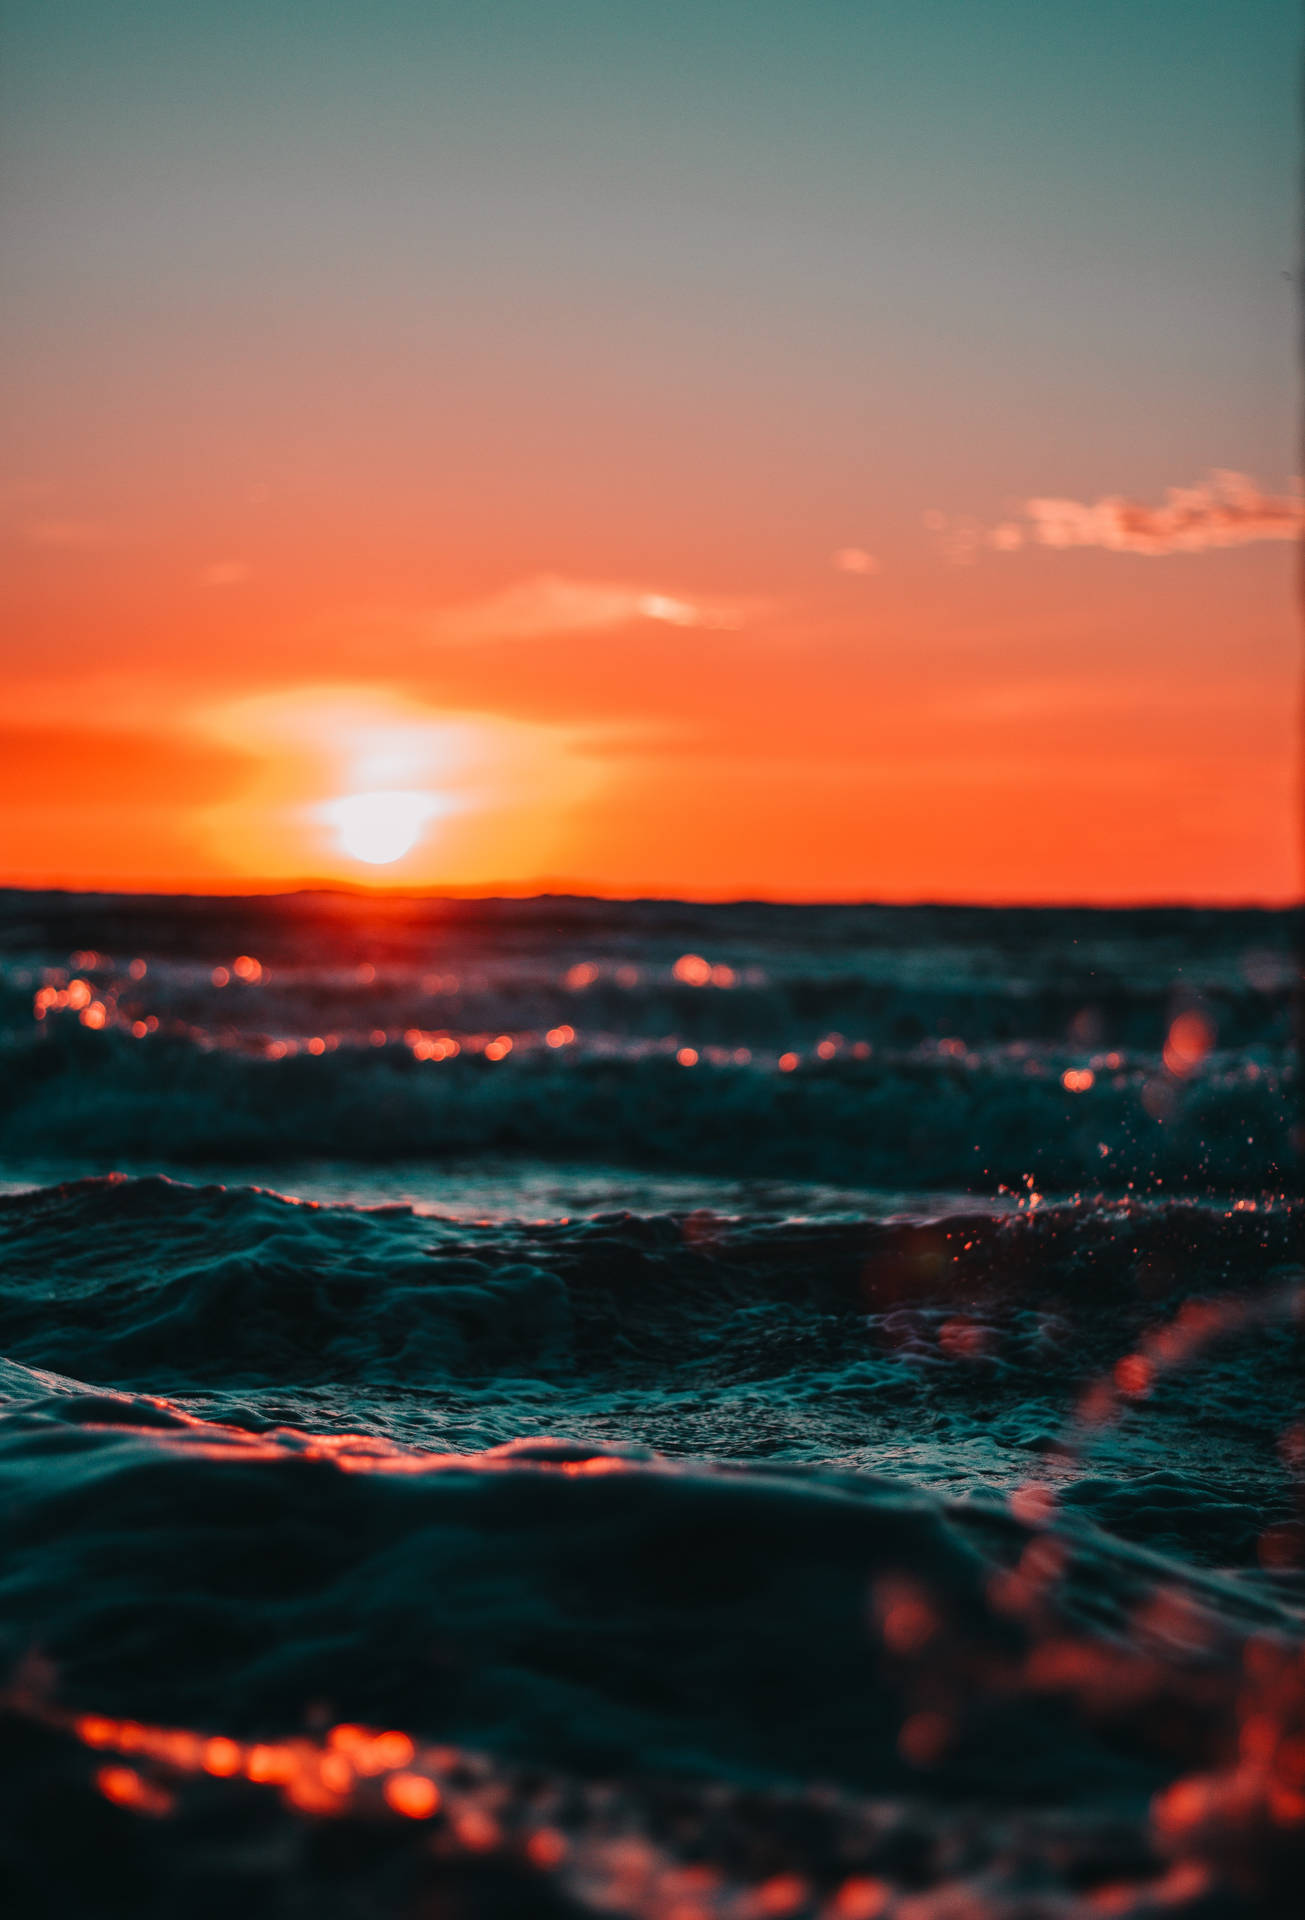 Iphone Home Screen Waves Sunset Background